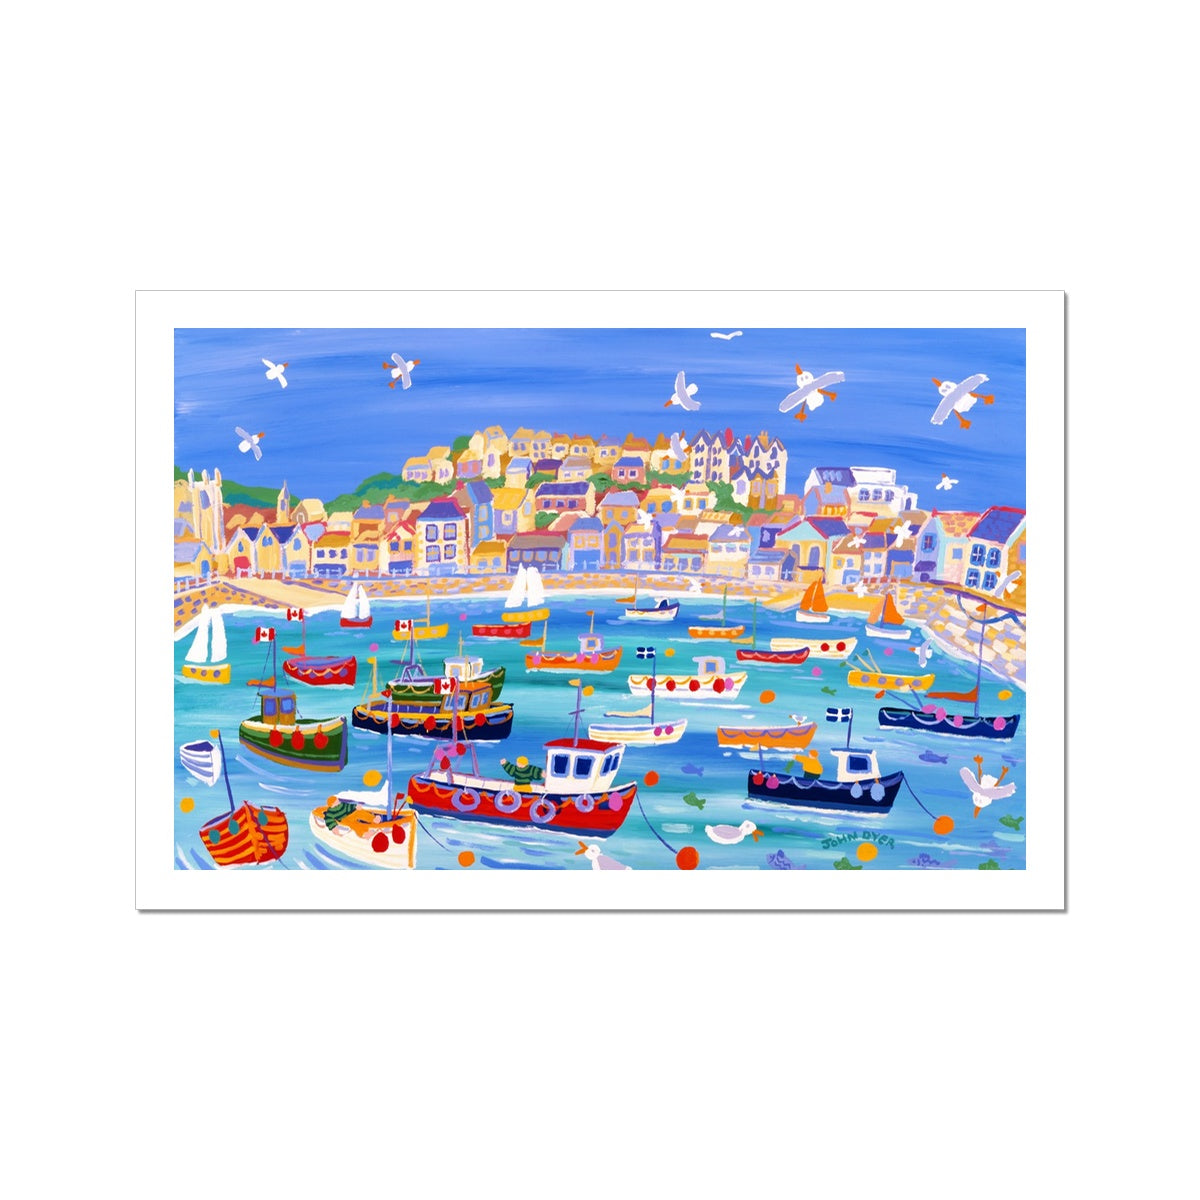 John Dyer Fine Art Print. Open Edition Cornish Art Print. 'Boats in the Harbour on a High Tide, St Ives'. Cornwall Art Gallery